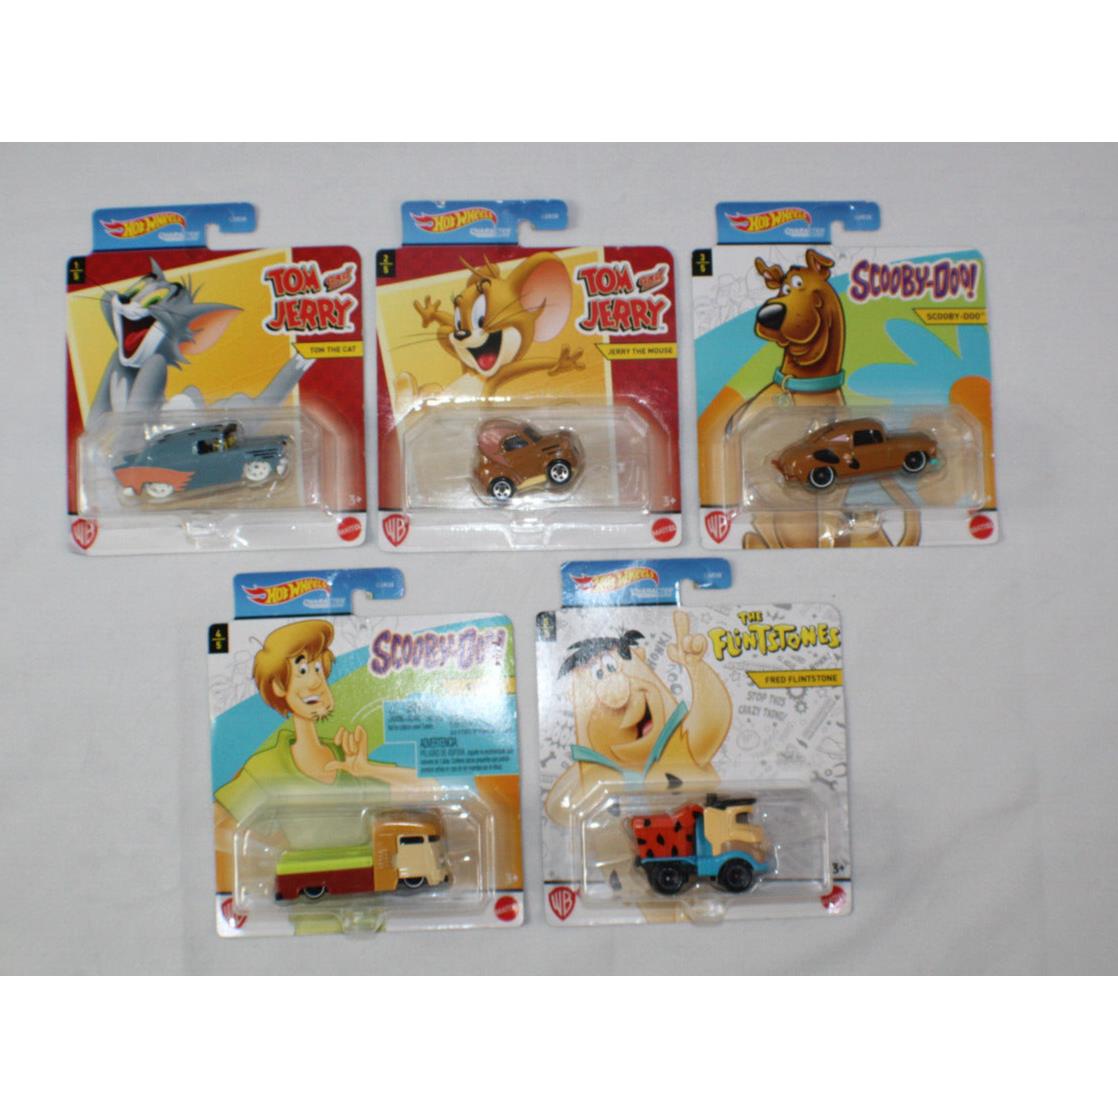 Hot Wheels Character Cars Complete Set Of Cartoons: Tom Jerry Scooby Doo Plus